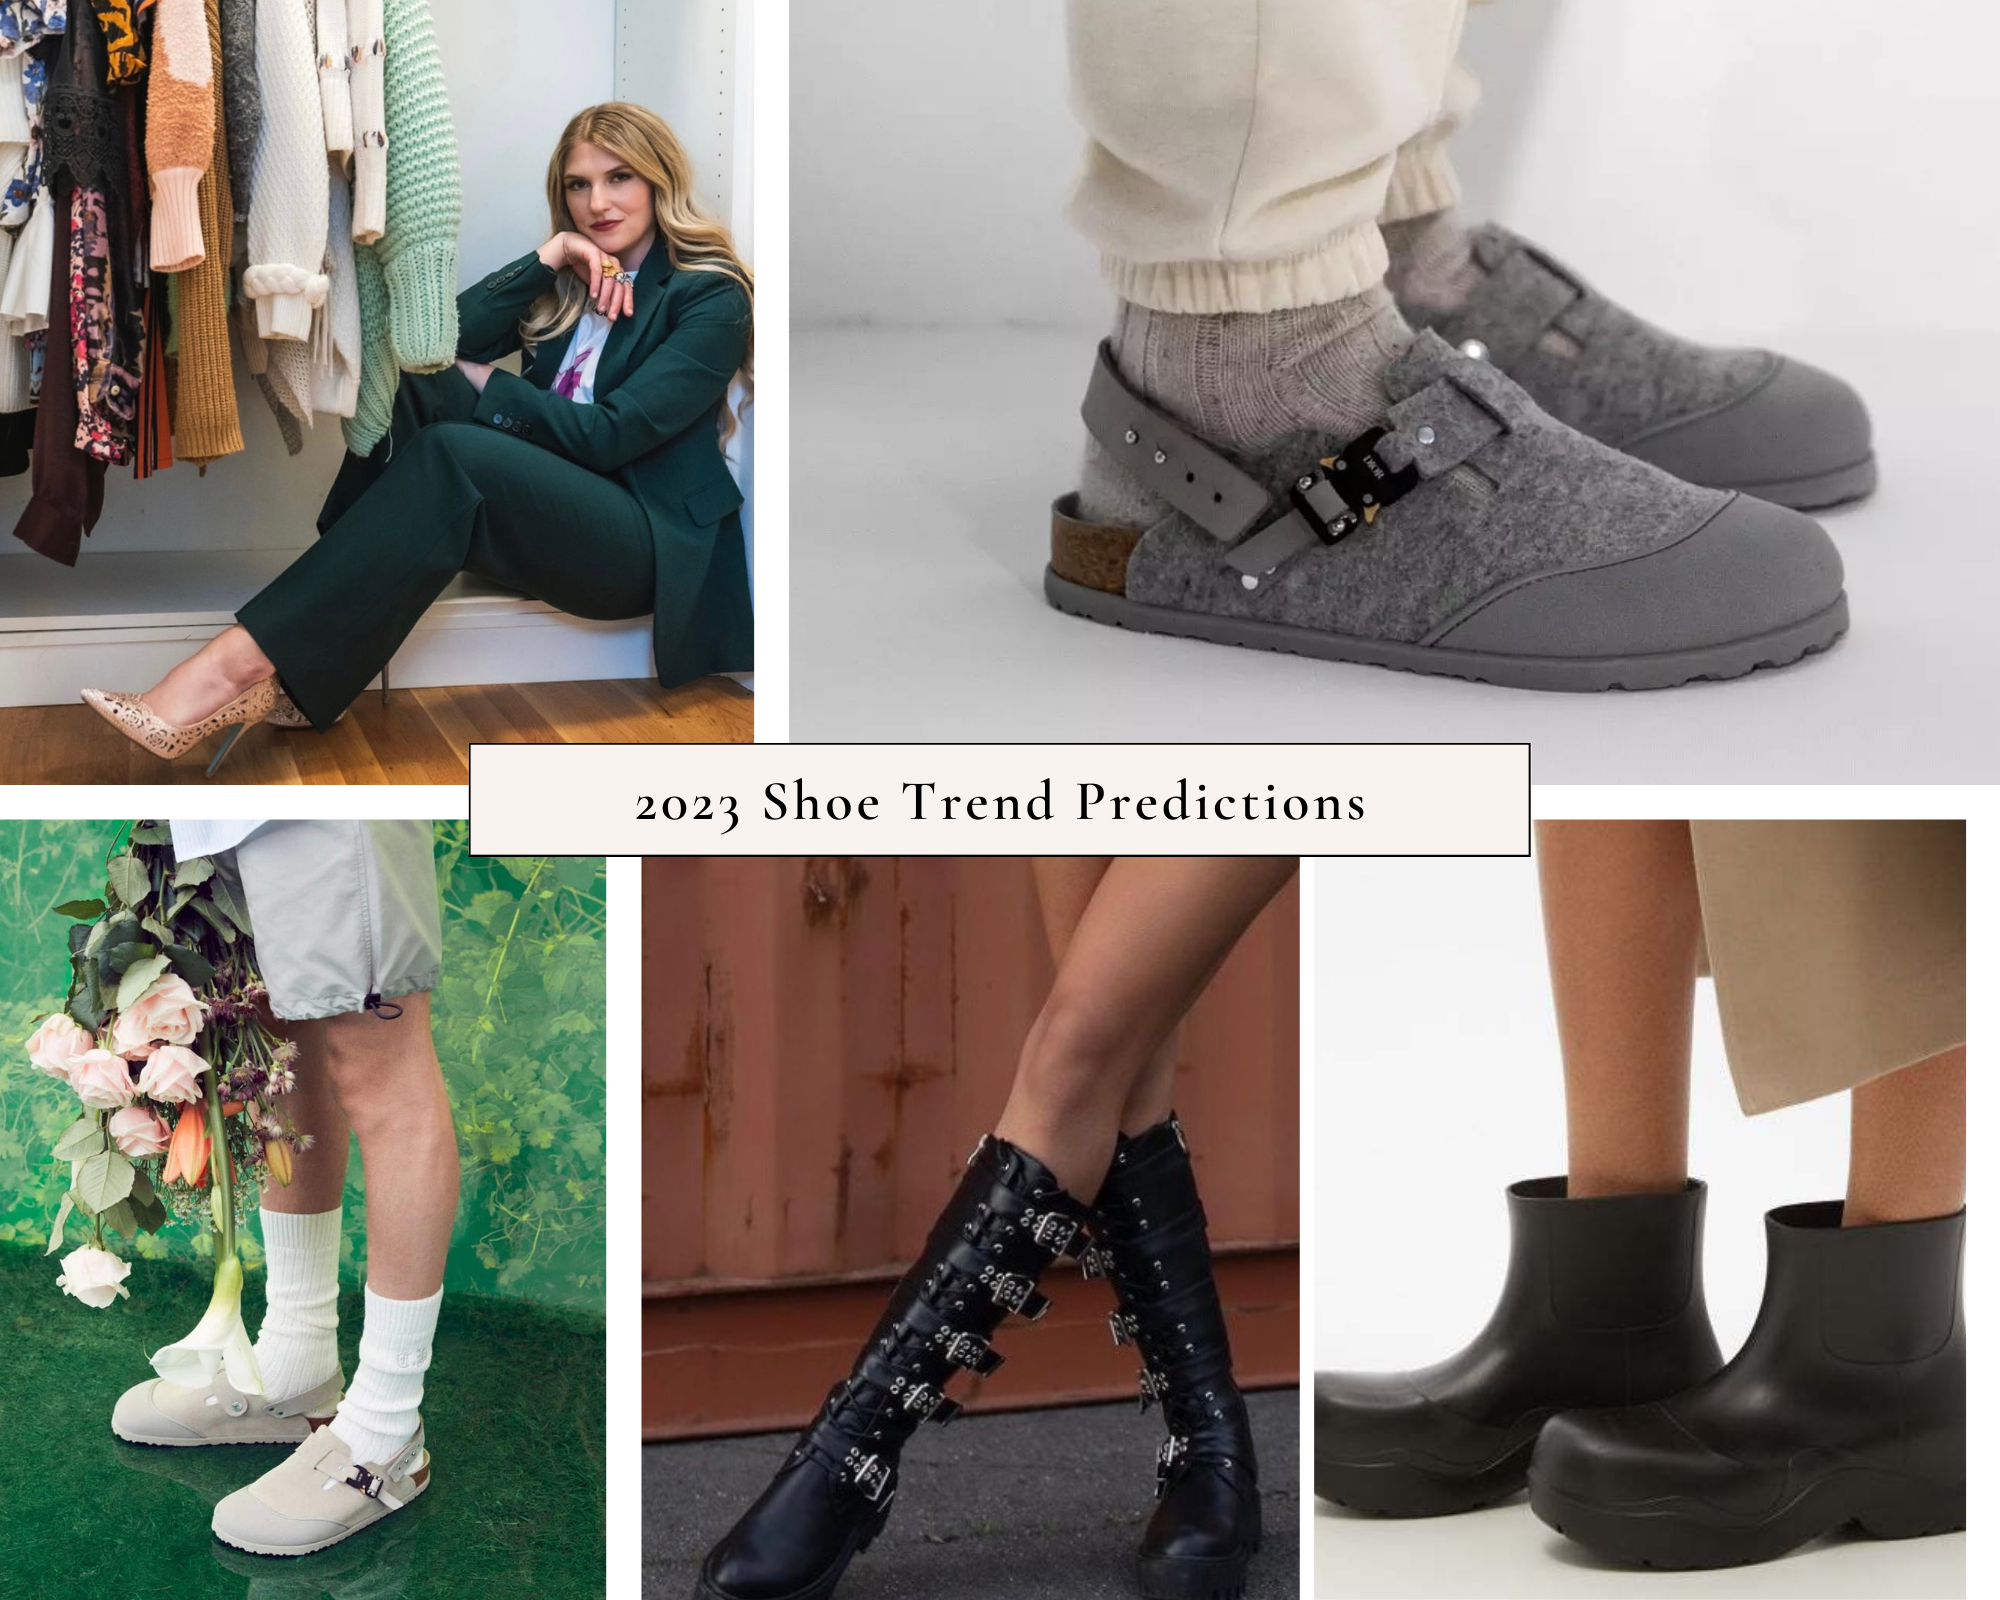 Collage of shoe trends, including pointy toed heels, mules, buckled boots, and rainboots